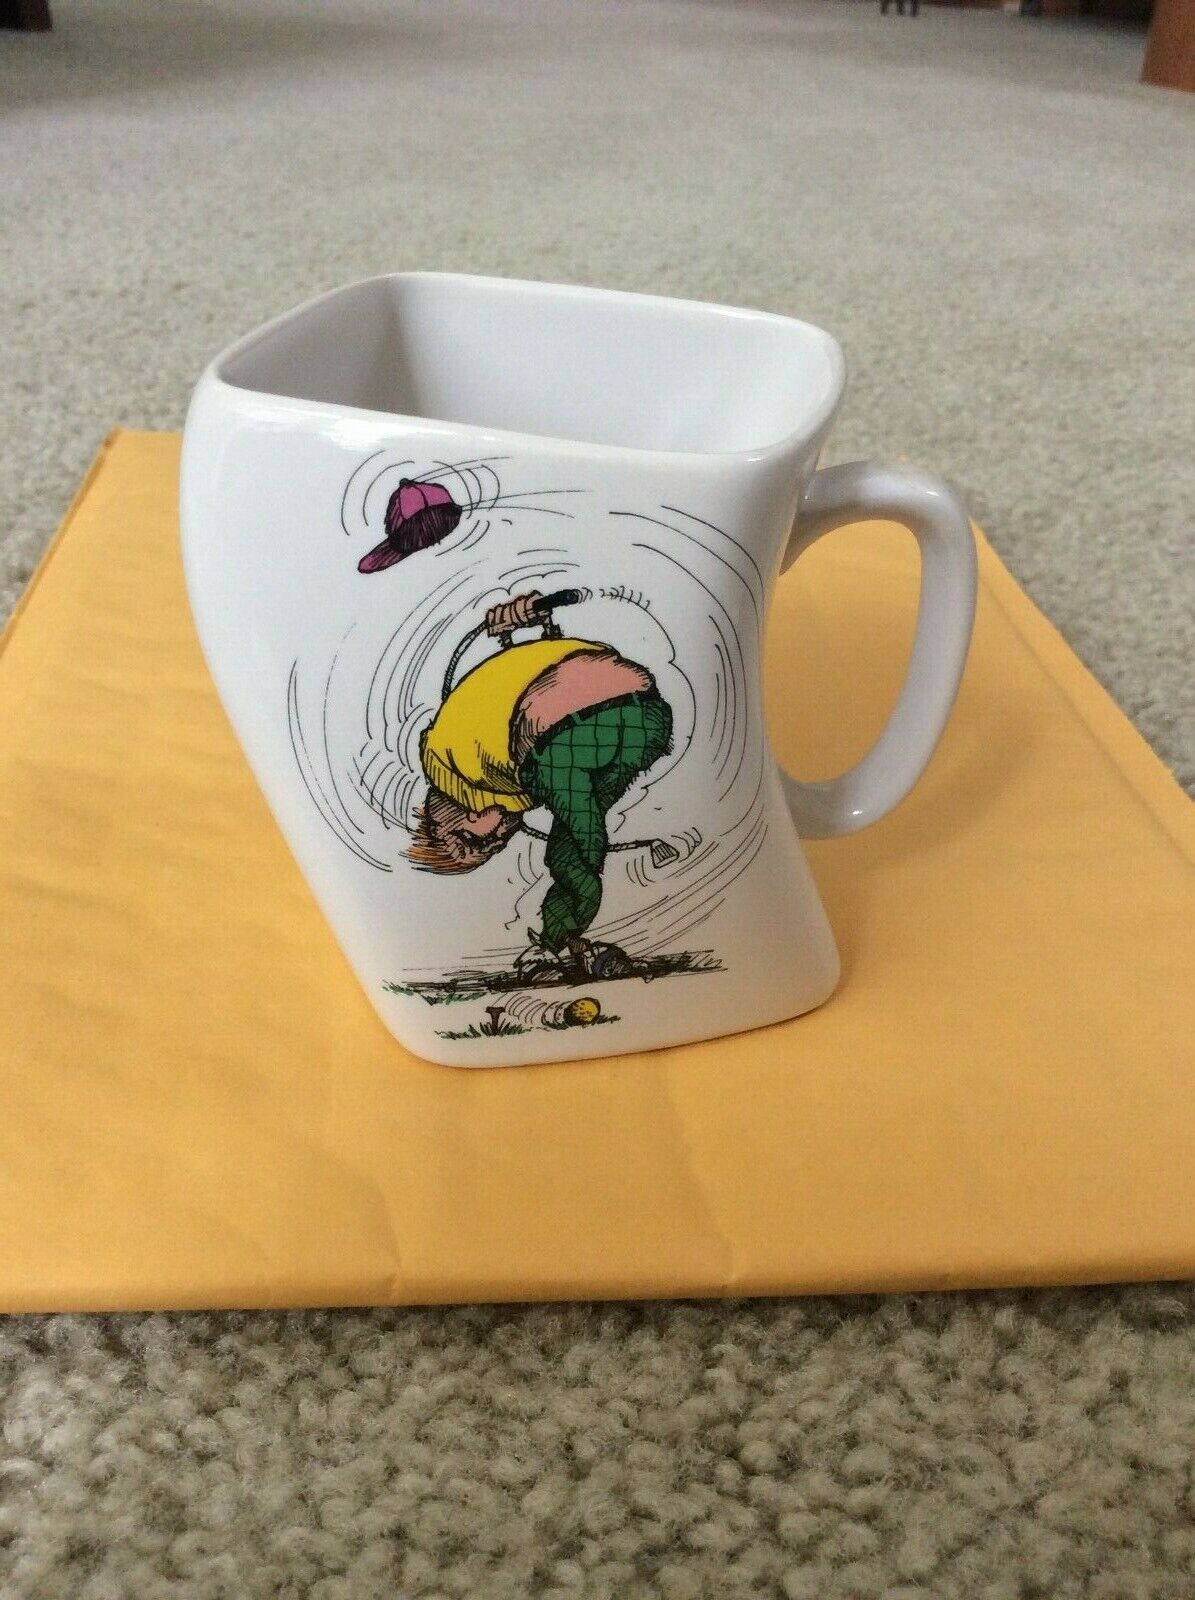 Twisted Golf Mug - The Results of Over Swinging